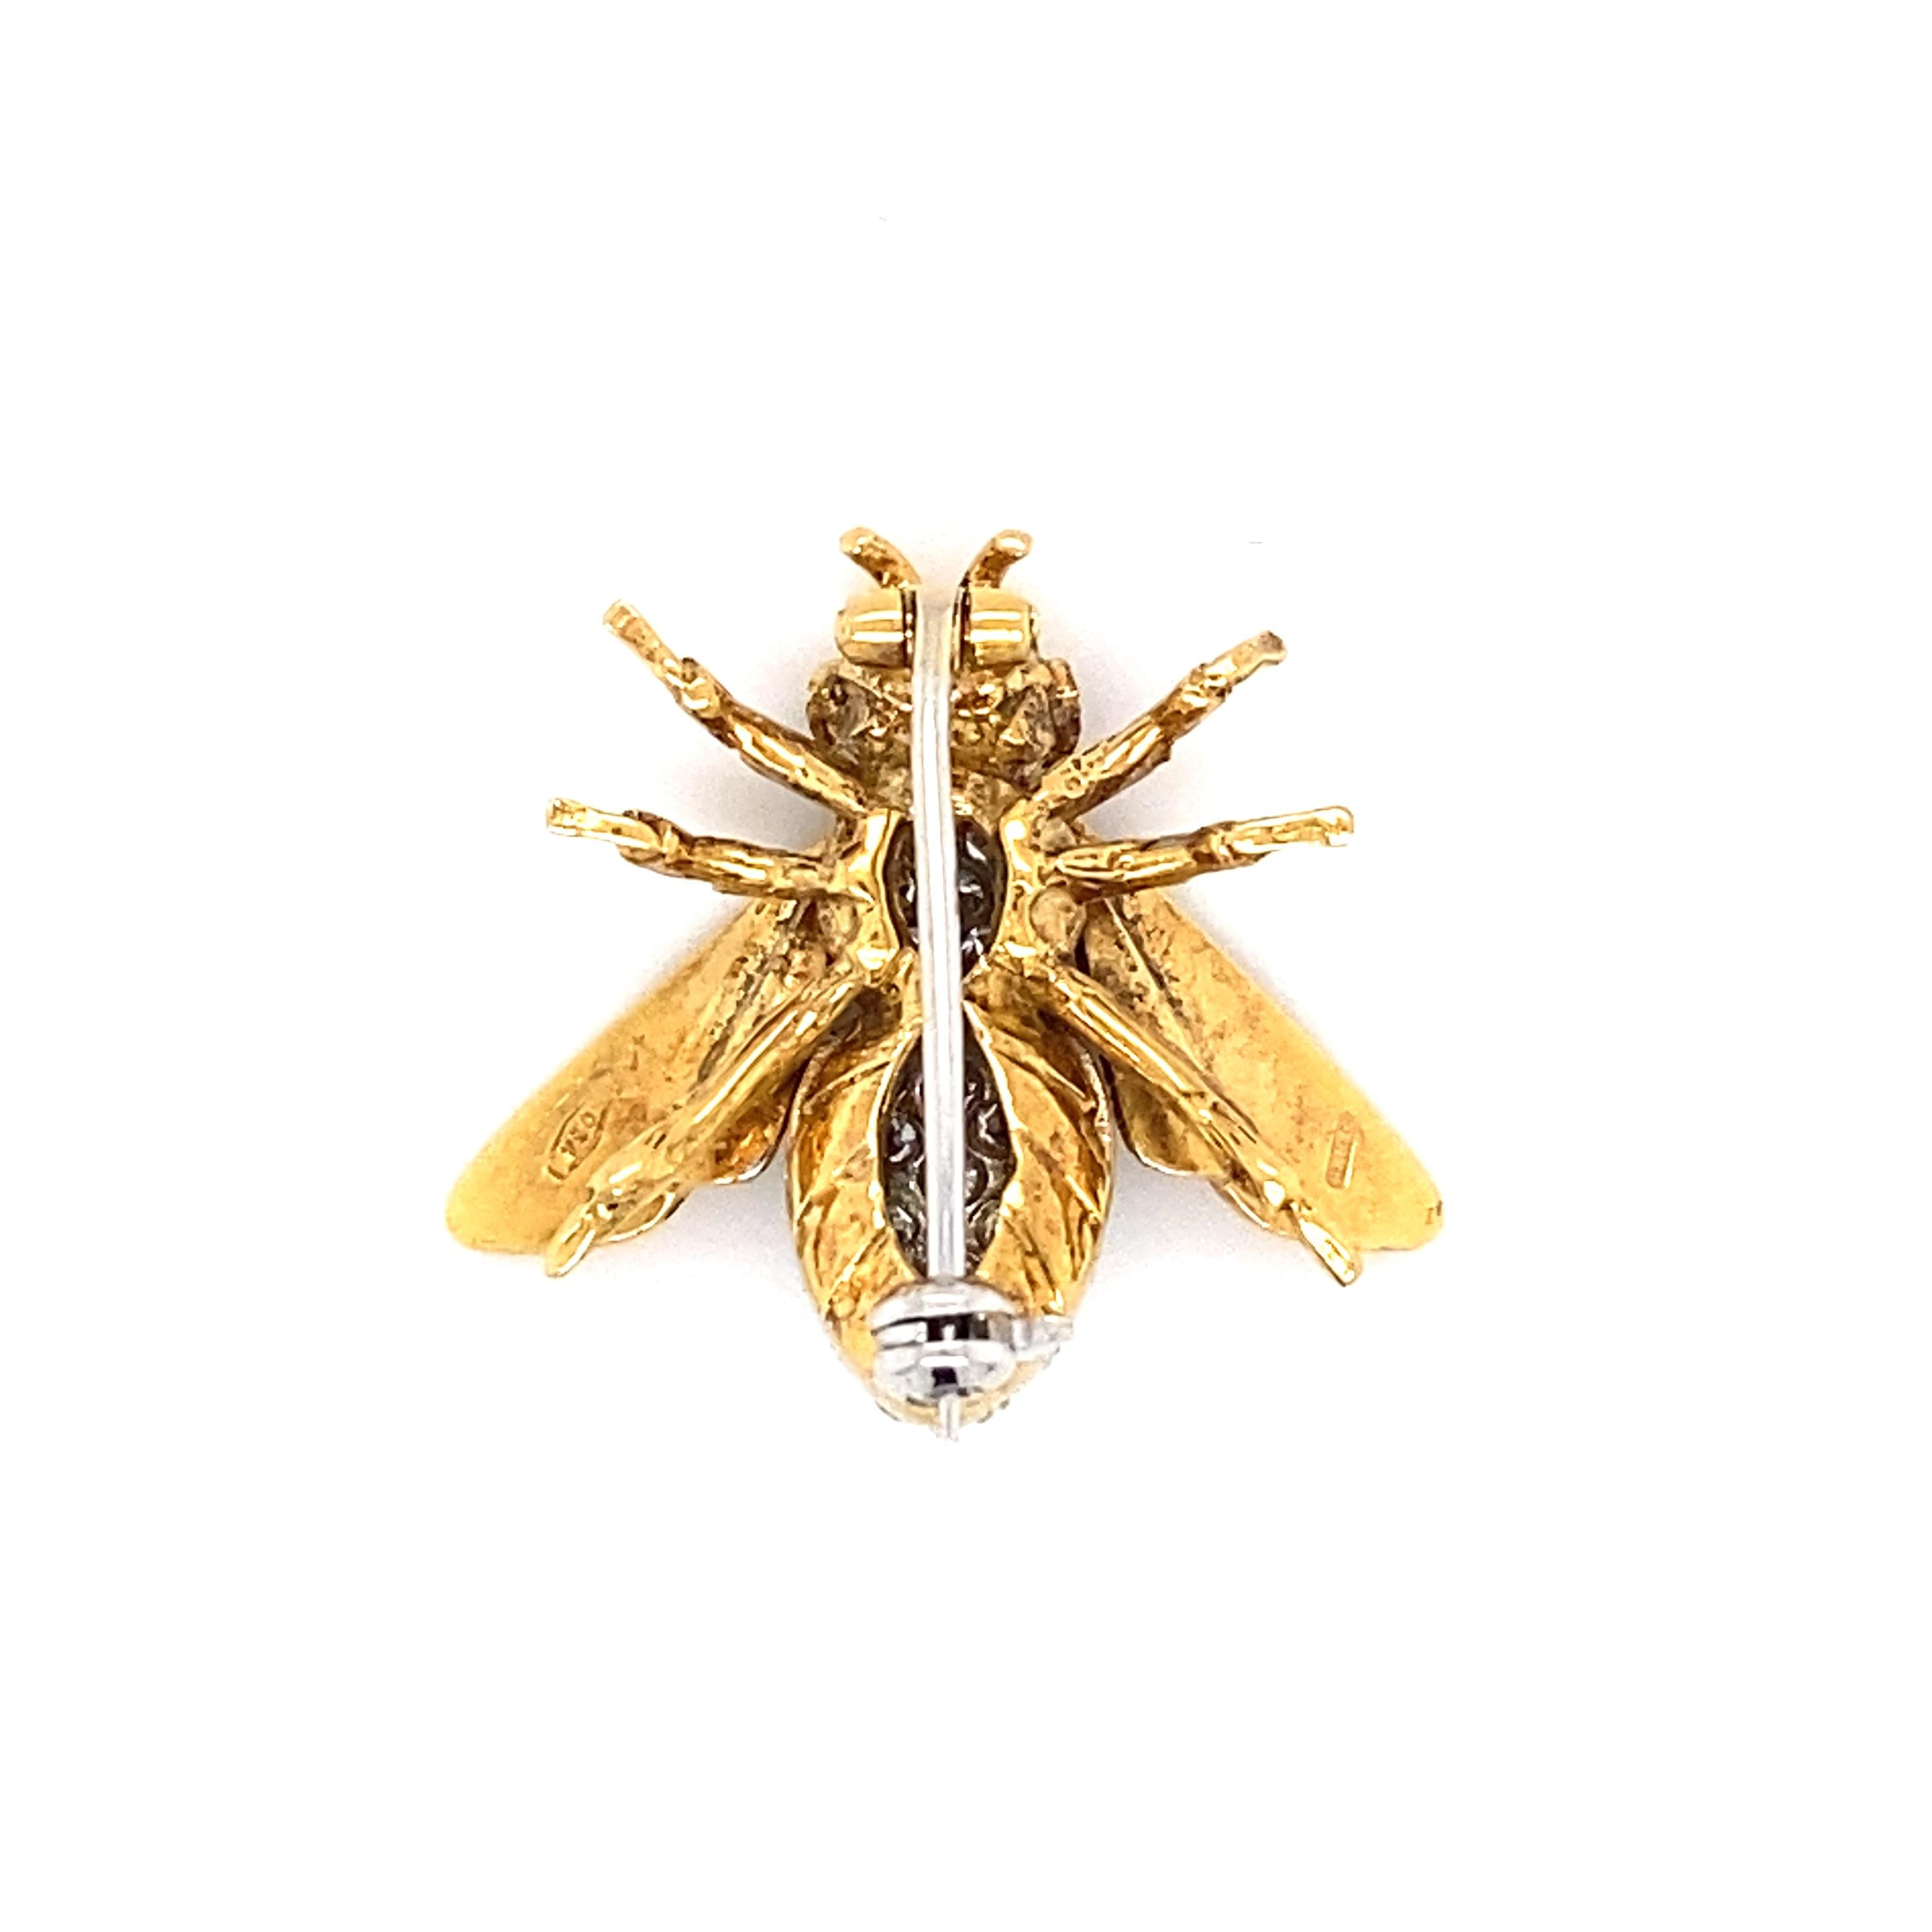 Item Details: This vintage bee brooch has diamond pave accents and ruby eyes.

Circa: 1960s
Metal Type: 18 Karat Yellow Gold

Diamond Details:

Carat: 0.40 carat total weight
Shape: Round
Color: G-H
Clarity: VS